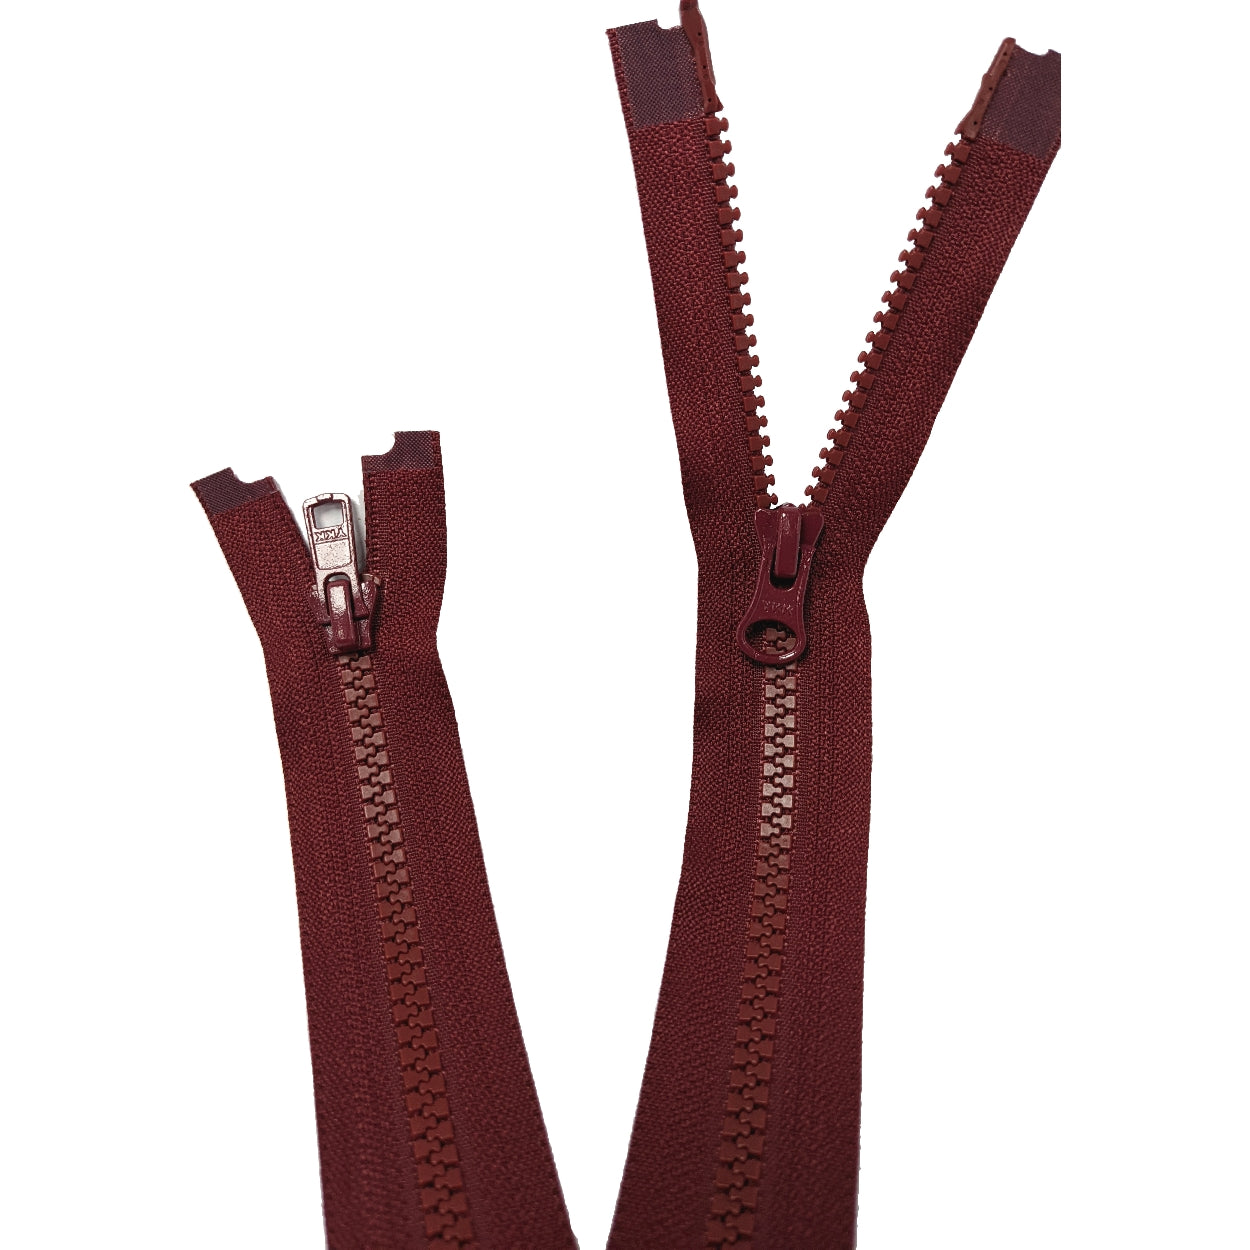 YKK Two Way Open End Zip No.5 | Medium | Wine from Jaycotts Sewing Supplies